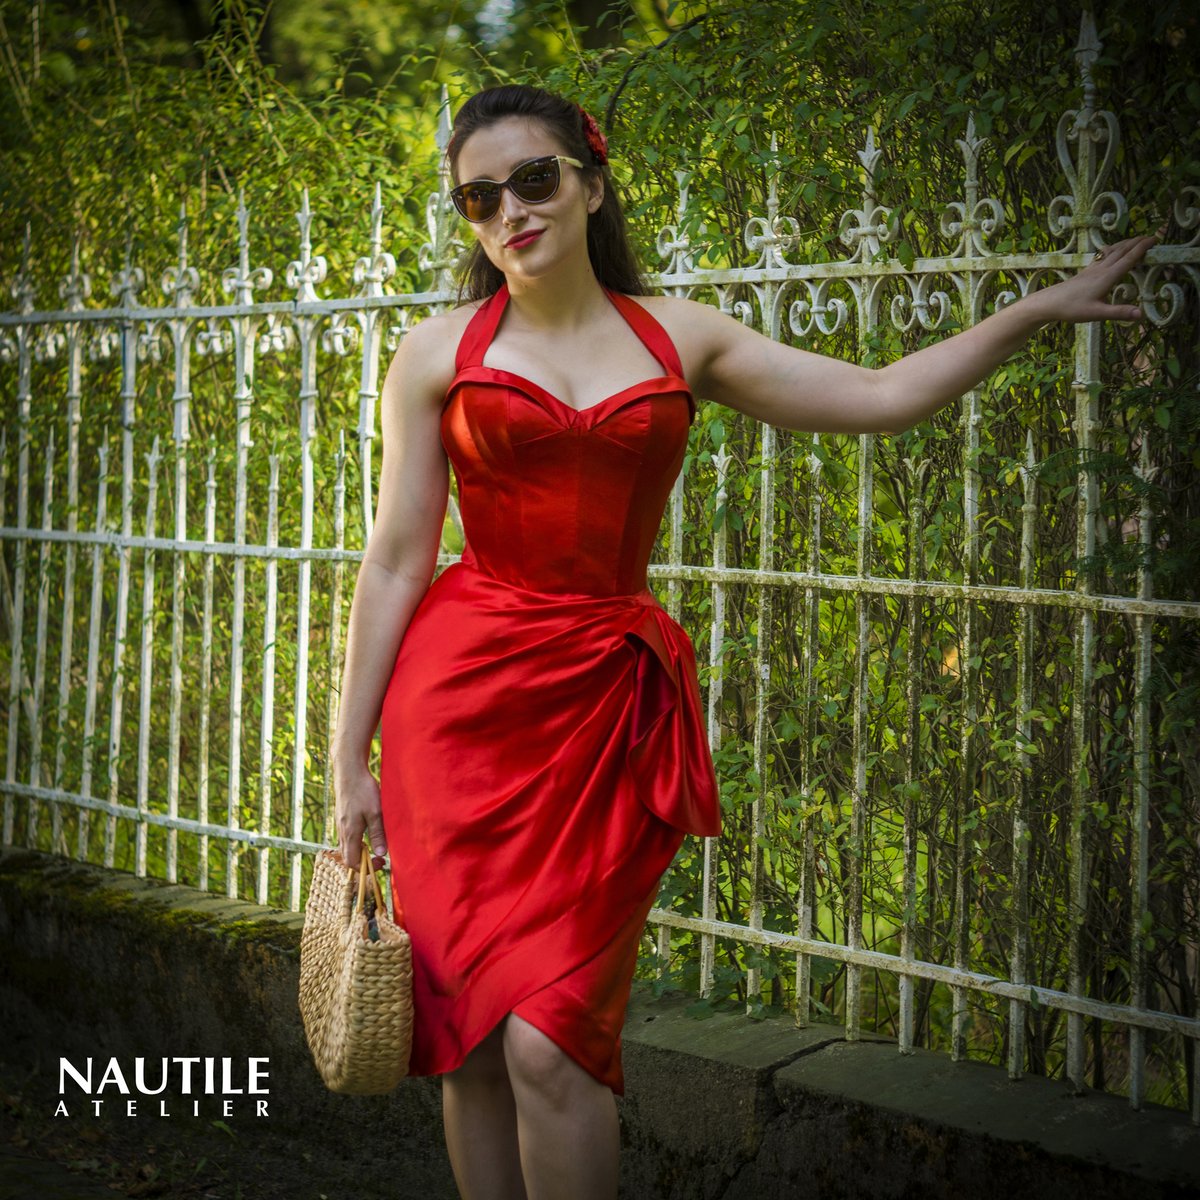 I started @NautileAtelier account today for showcasing some of our real life corsetry and eveningwear projects. See you there if you're into some retro steampunk and gothic styles. #nautile #corsetry #corsetdress #corsets #pinup #bespoke